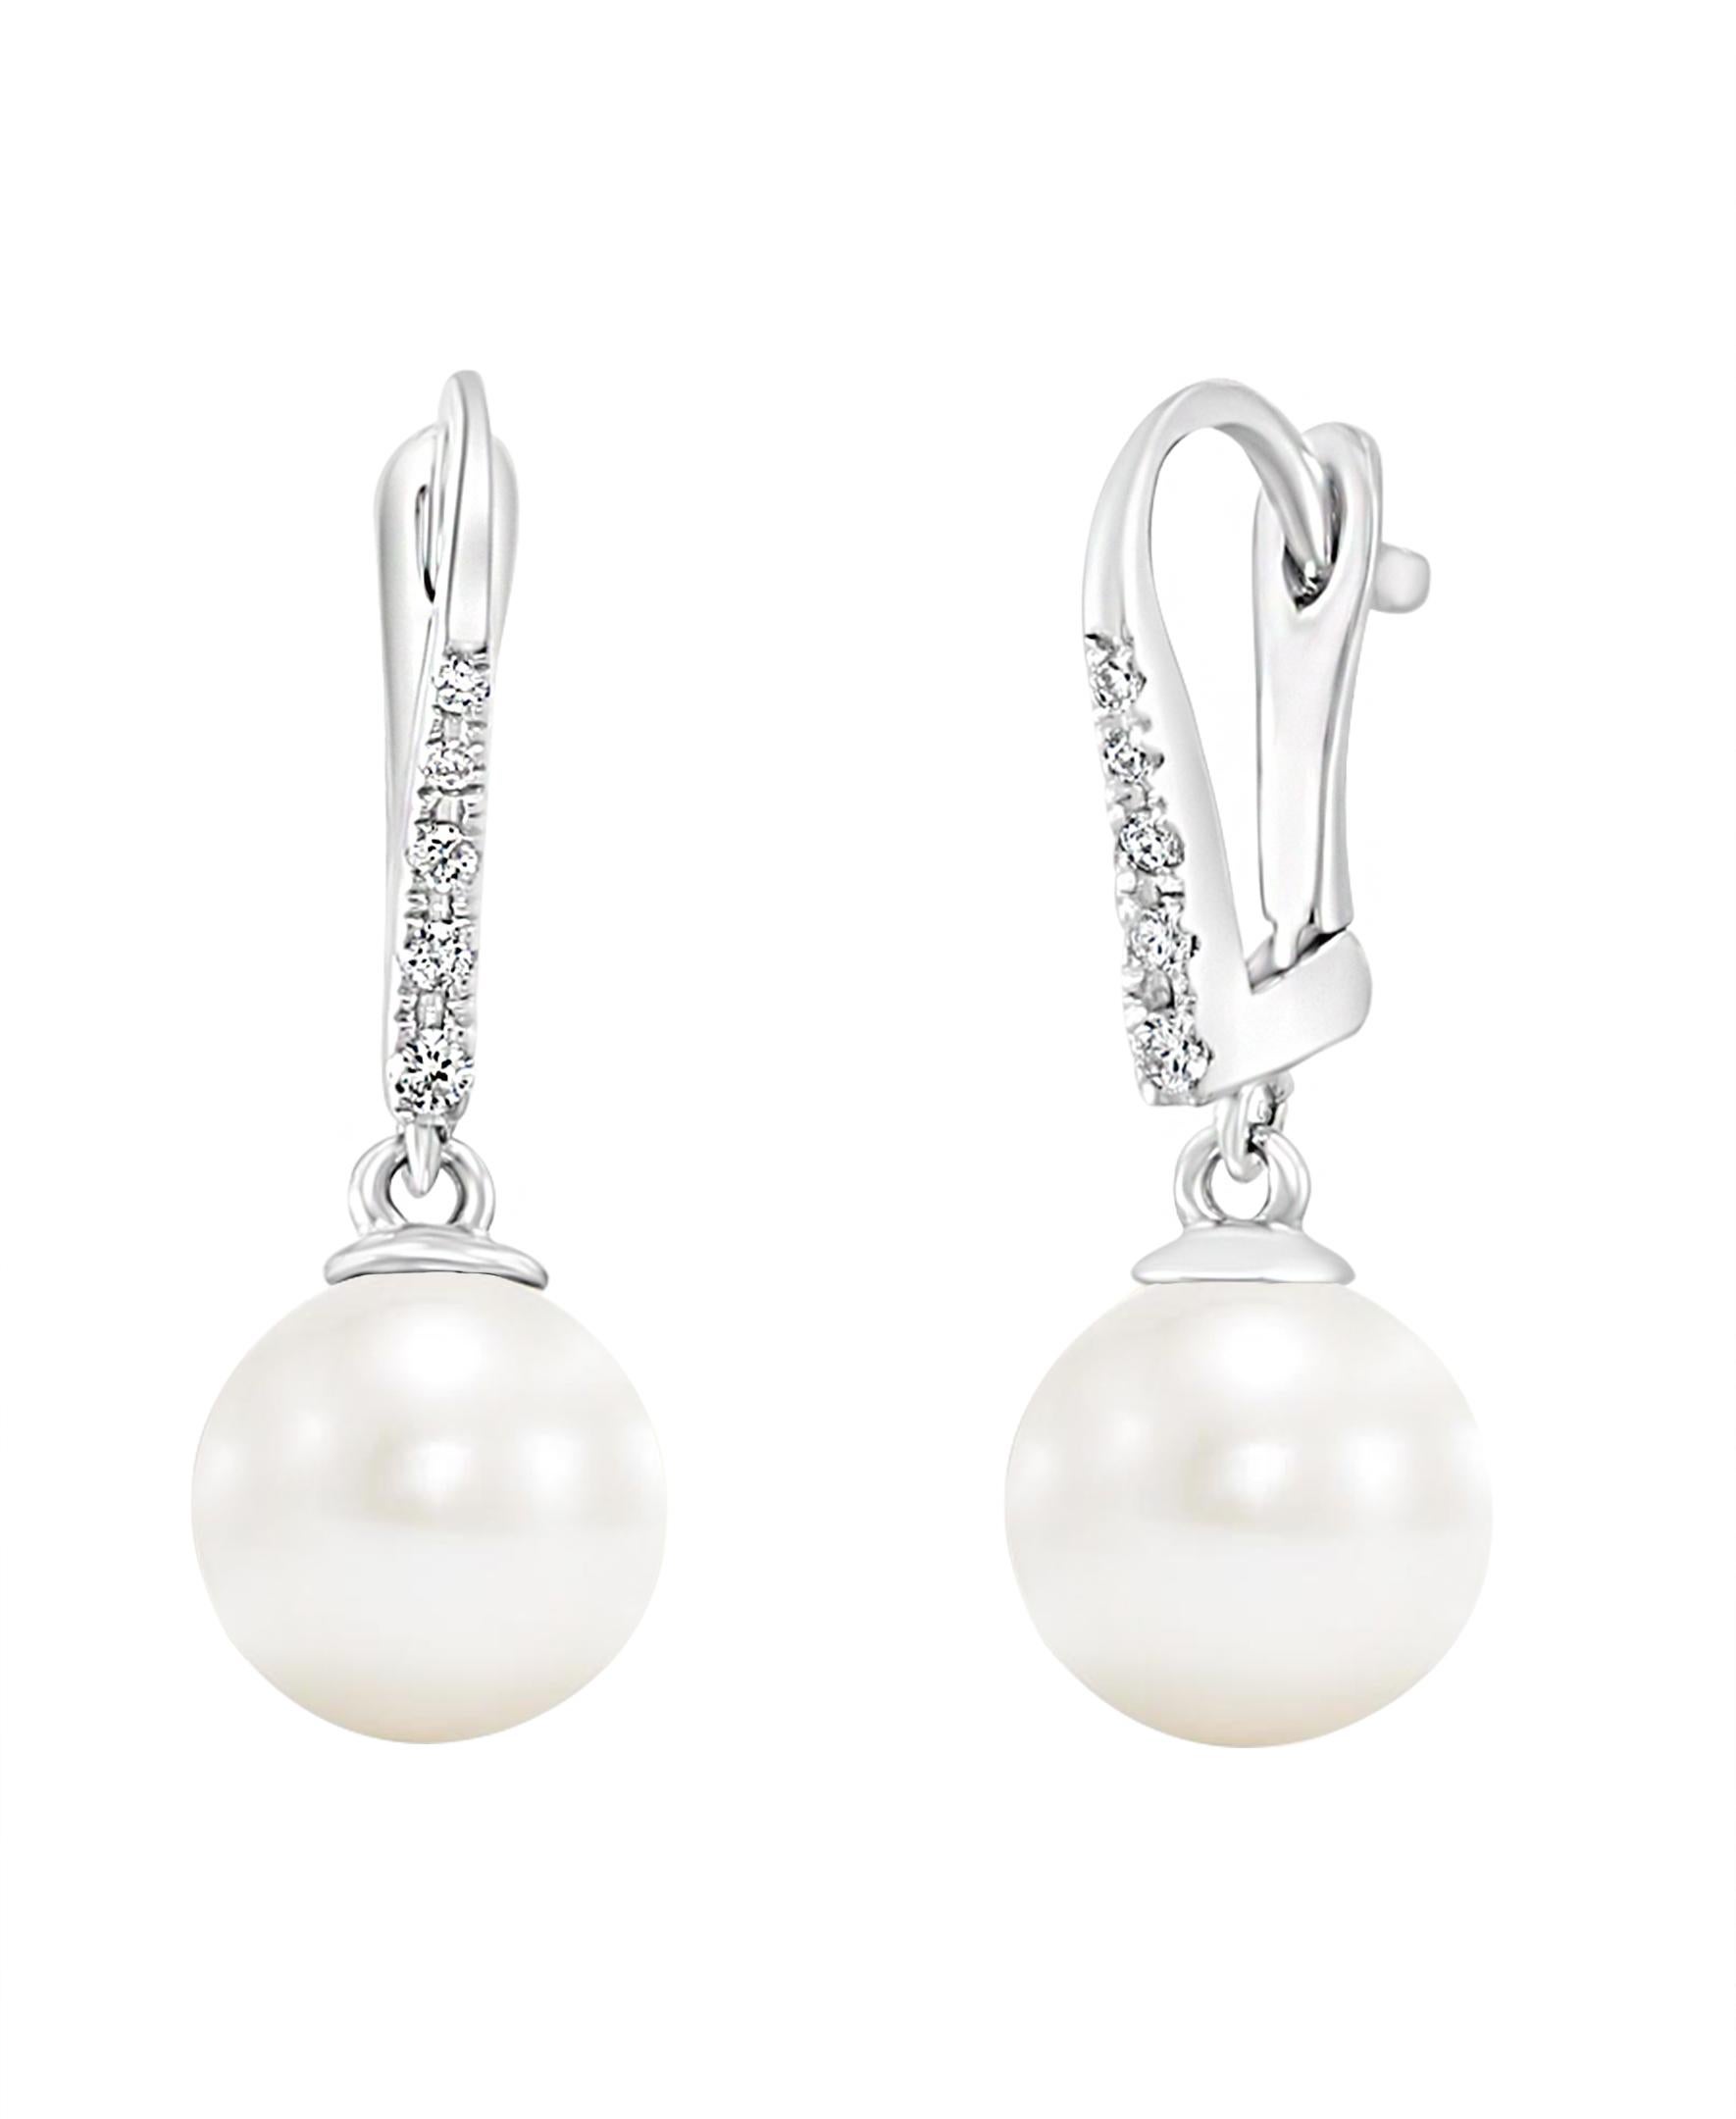 These 8-8.5mm Chinese freshwater cultured pearls are set on 14K white gold lever-back findings adorned with diamonds. These elegant earrings create the perfect complement for any evening wear outfit.
- 14K white gold
- Total diamond weight- 0.085